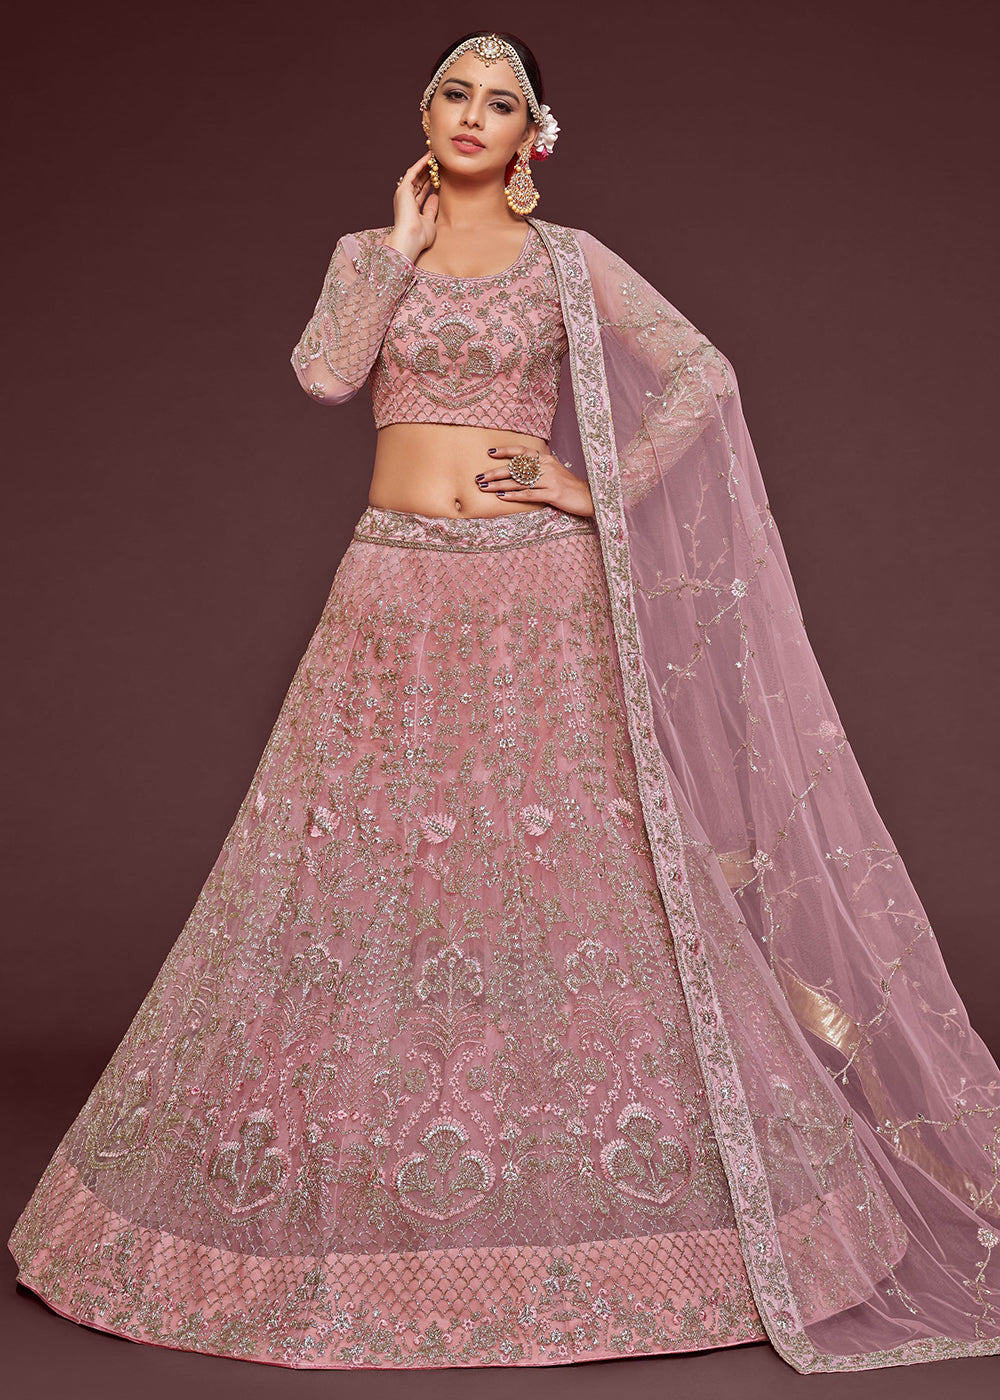 Buy Now Pearl Pink Embroidered Soft Net Wedding Lehenga Choli Online in USA, UK, Canada & Worldwide at Empress Clothing.